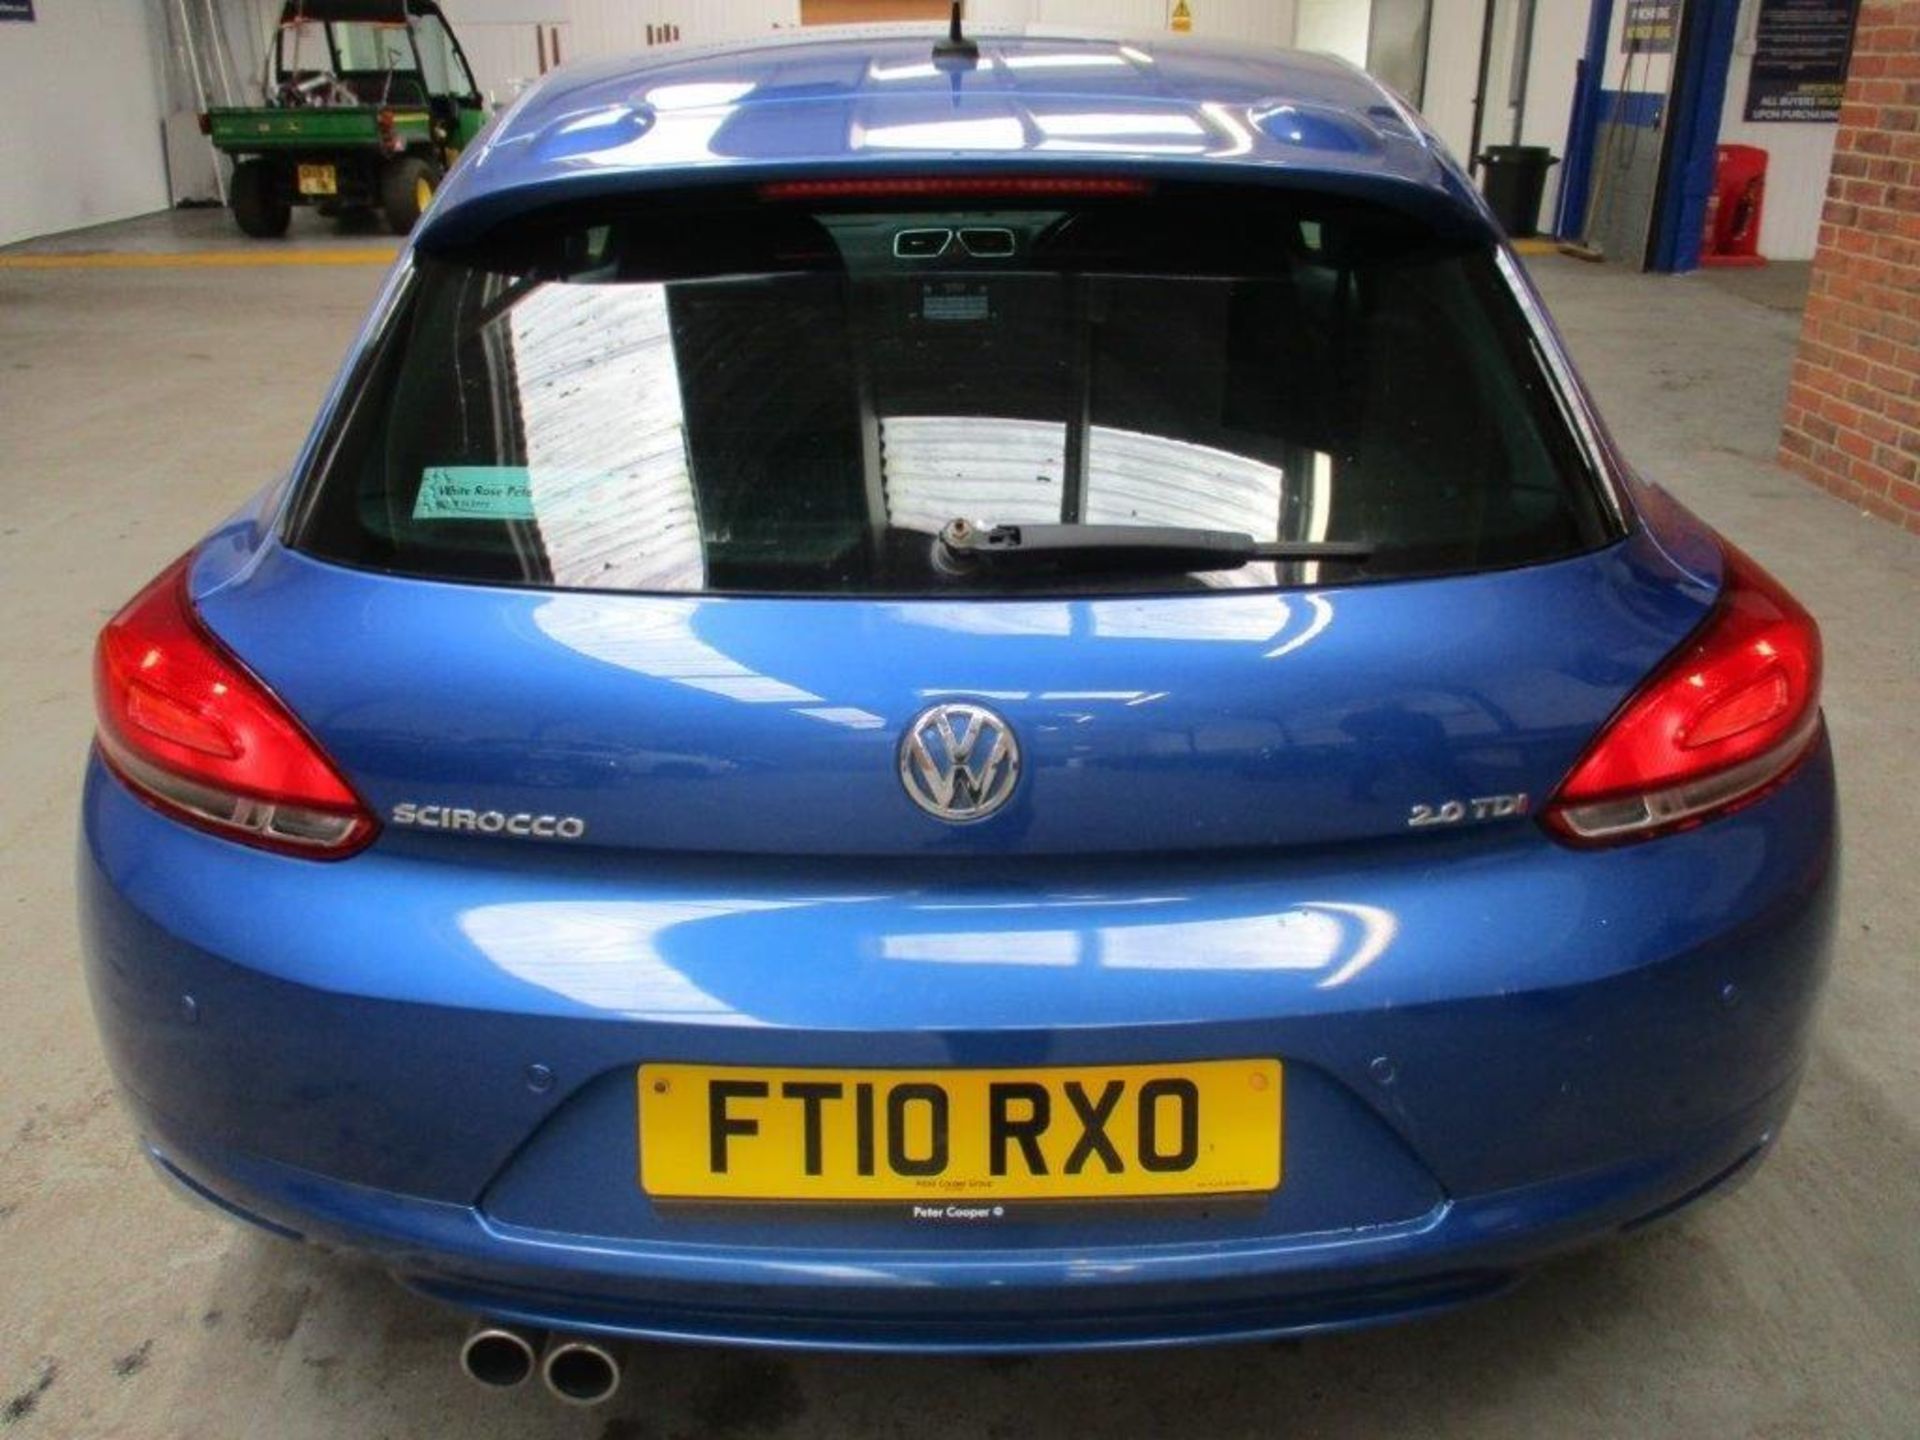 10 10 VW Scirocco GT TDI 170 - Image 3 of 24